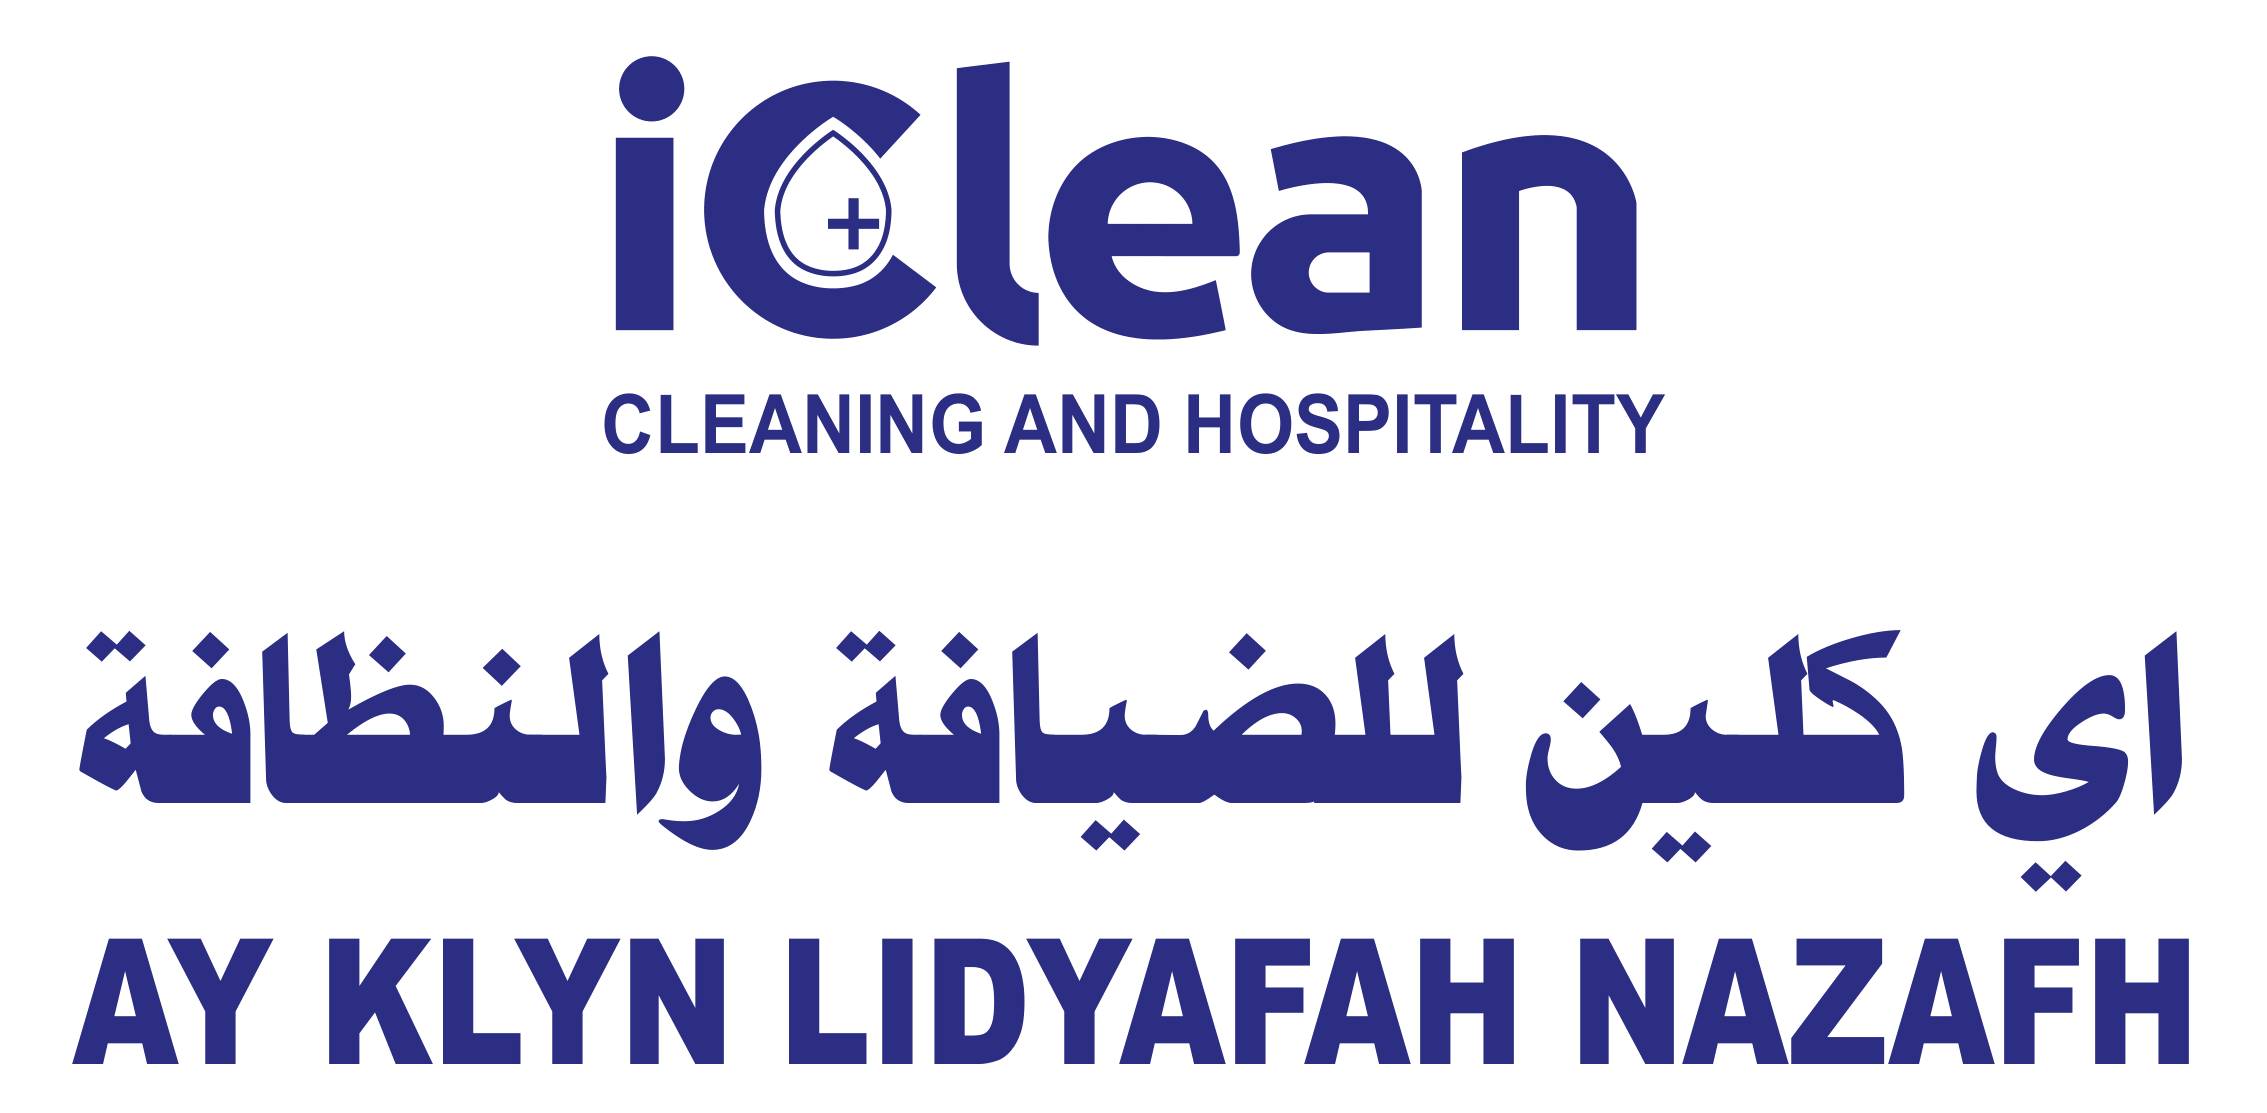 5 - City Plaza - Iclean Cleaning & Hospitality